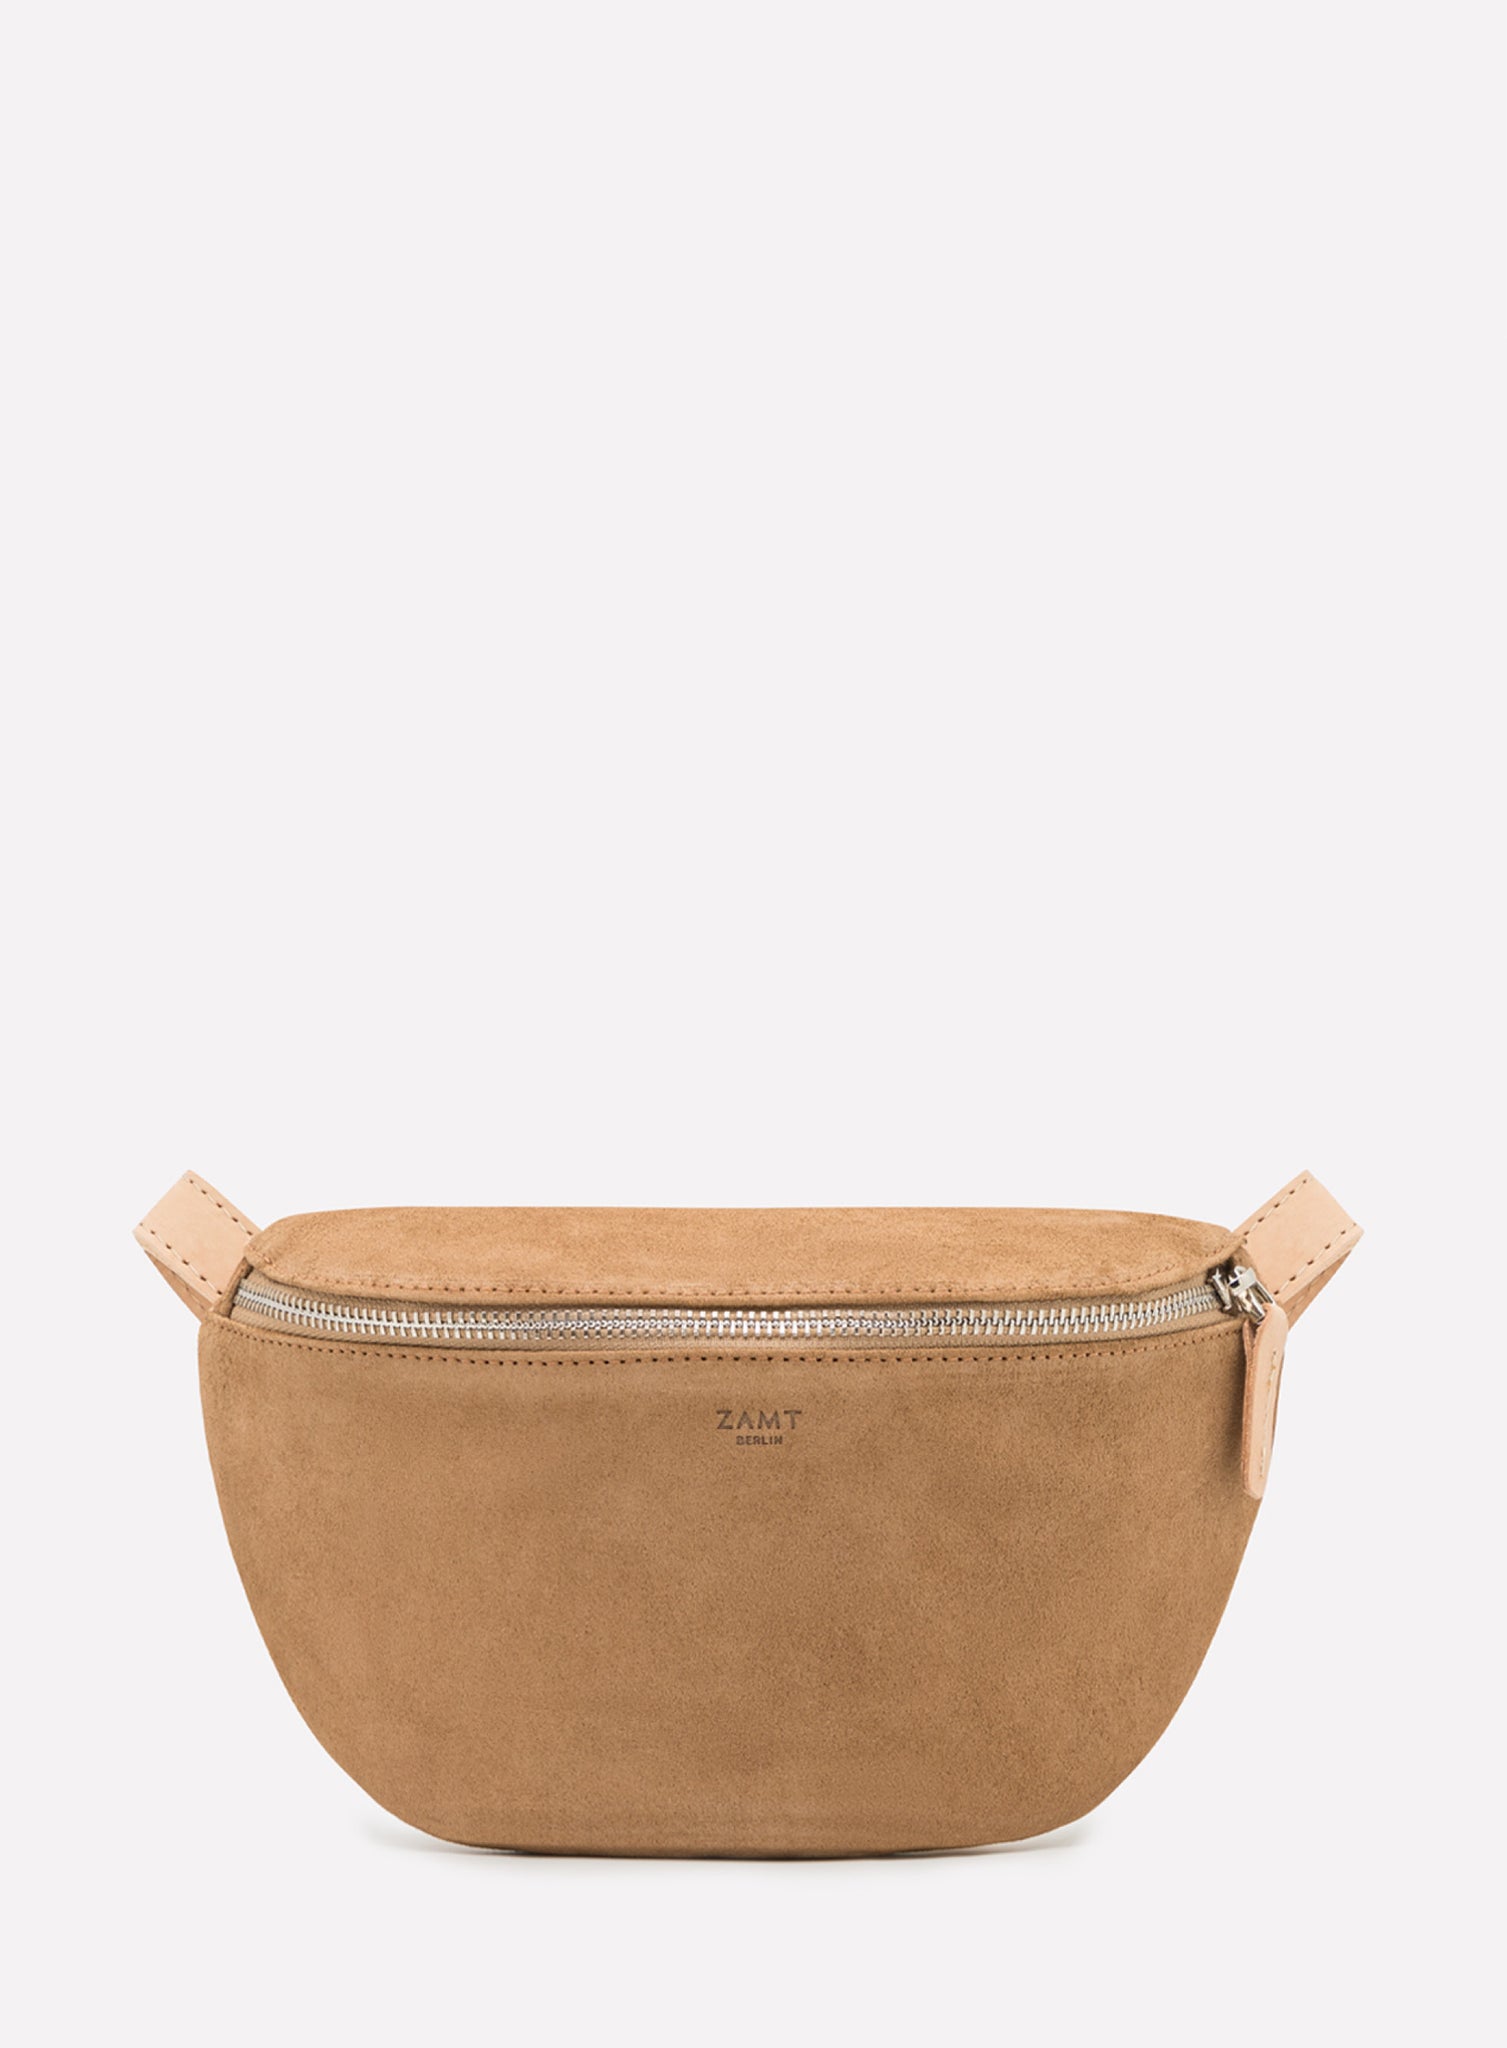 HIP_BAG_CAN_Suede_Sand_Designed_in_Berlin_Made_to_last_Handmade_in_Poland.